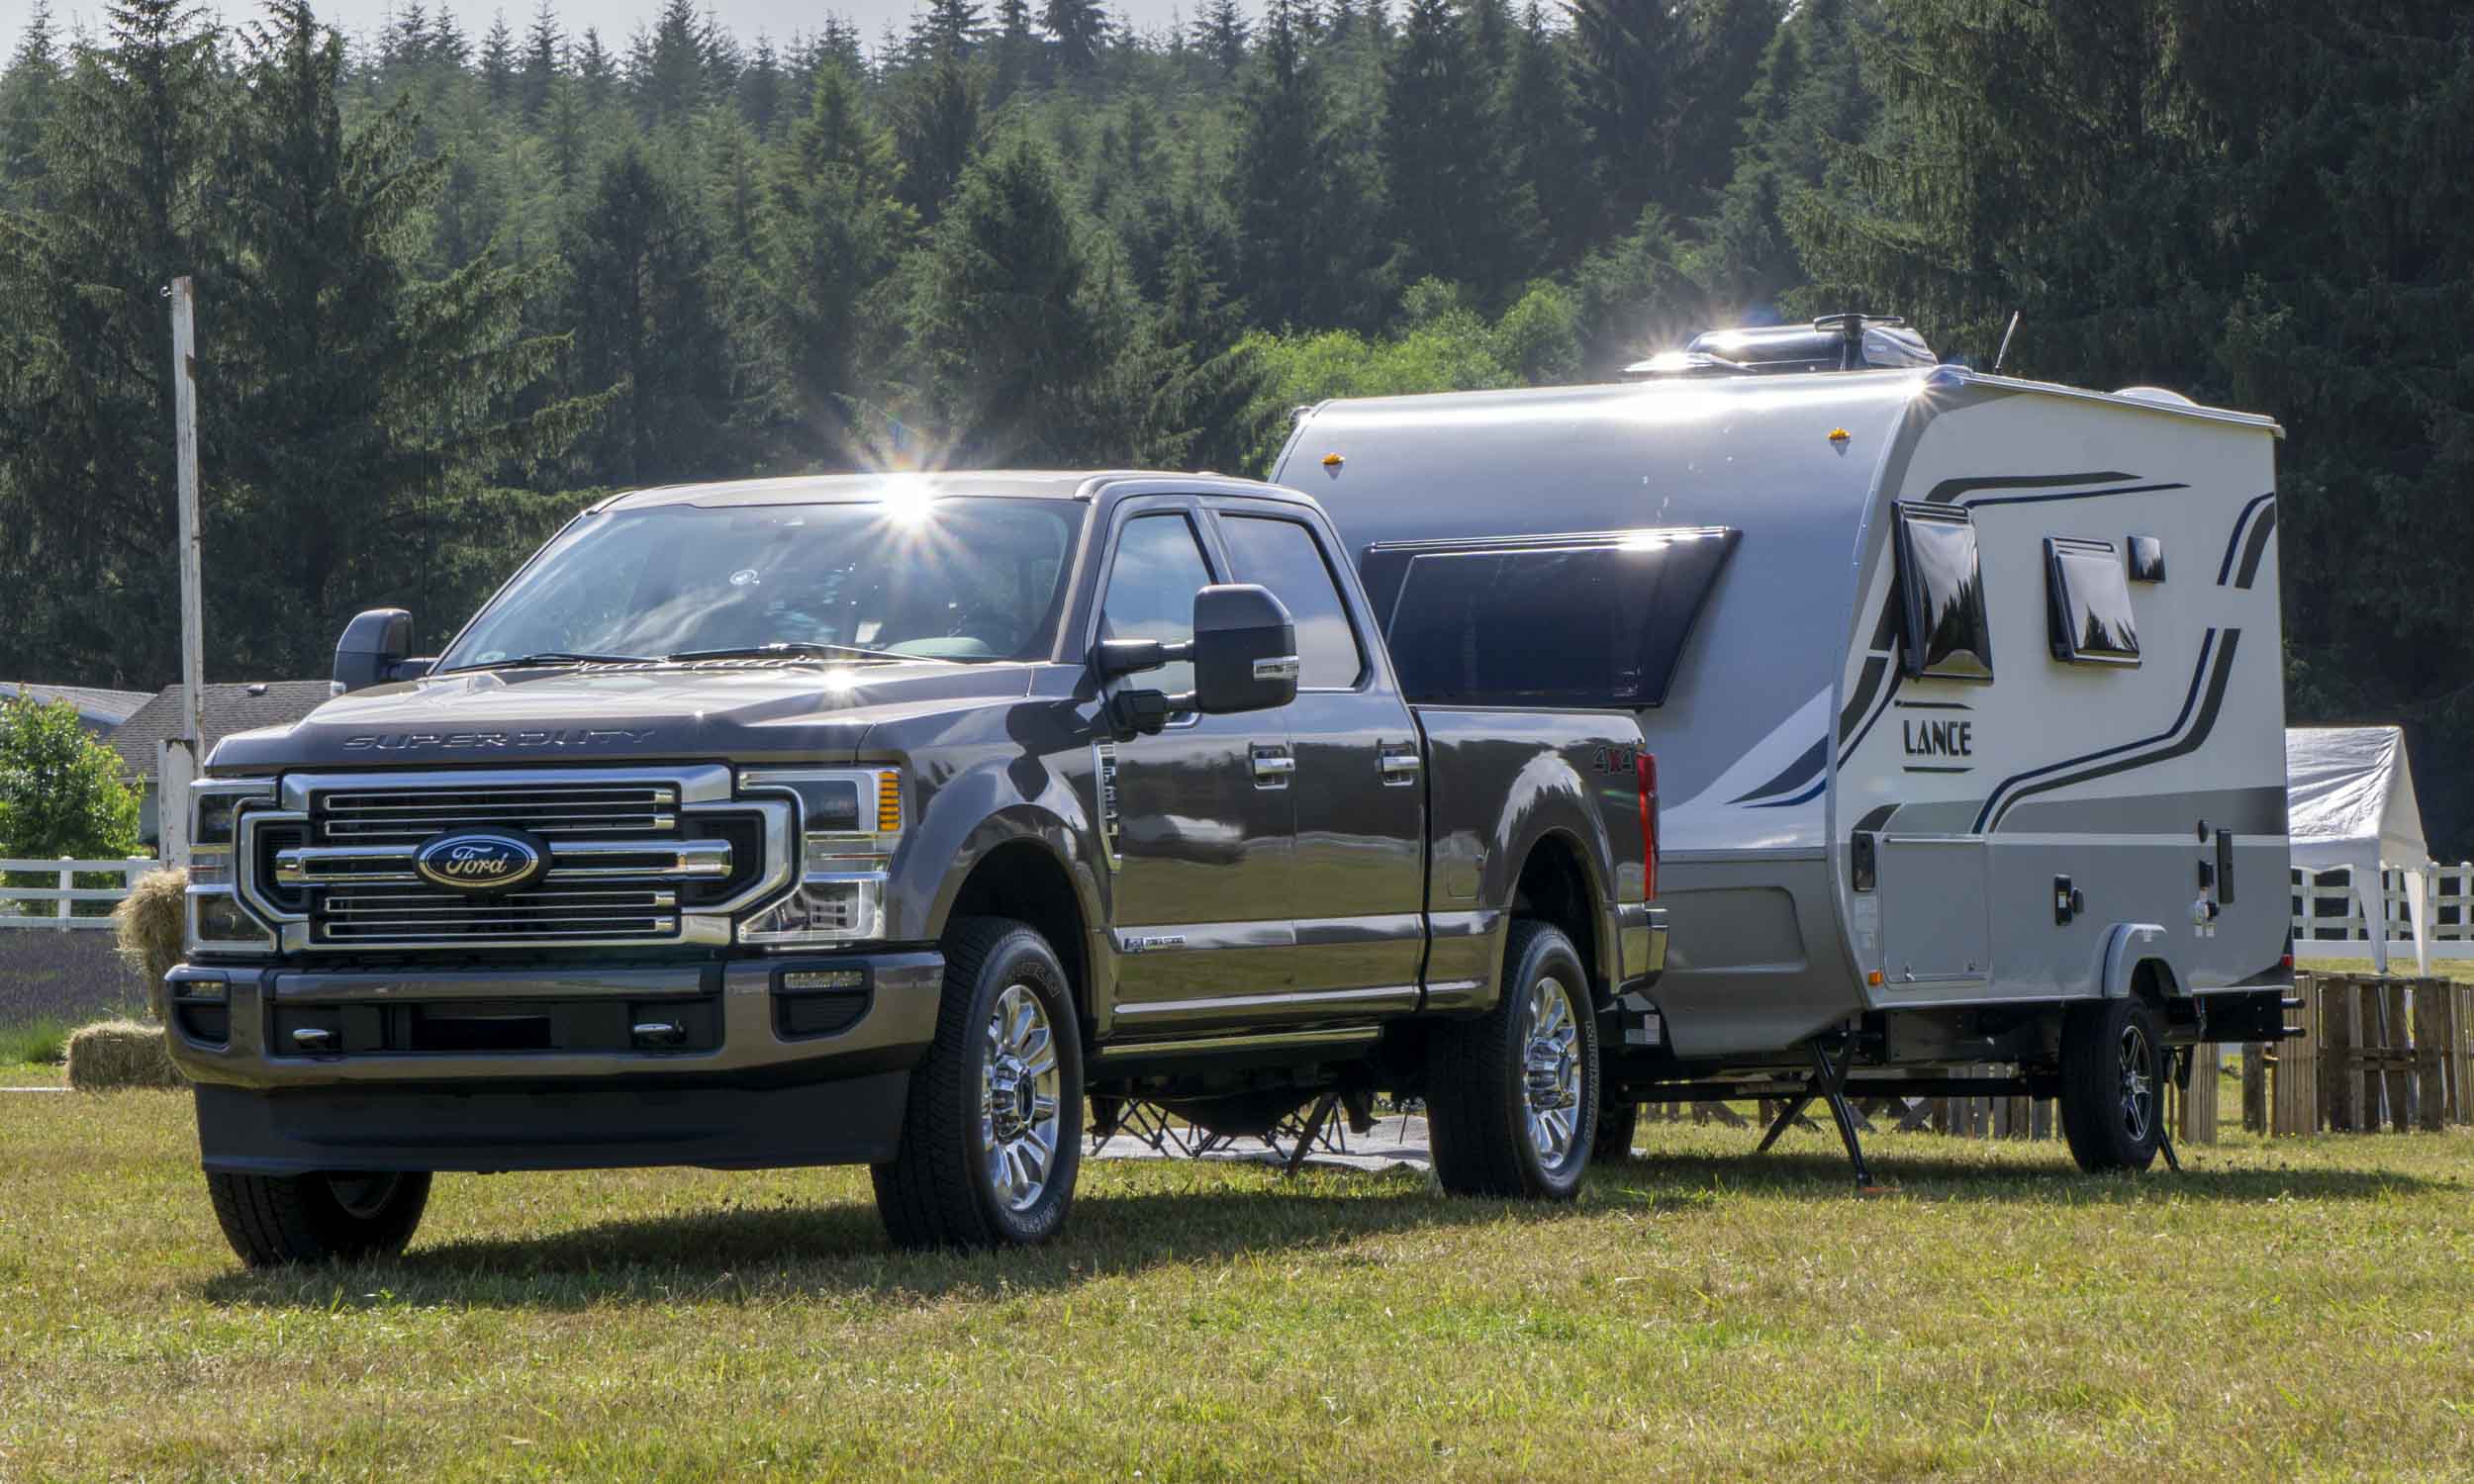 2021 Ford F-350 Super Duty Review: Beauty and Beast - autoNXT.net